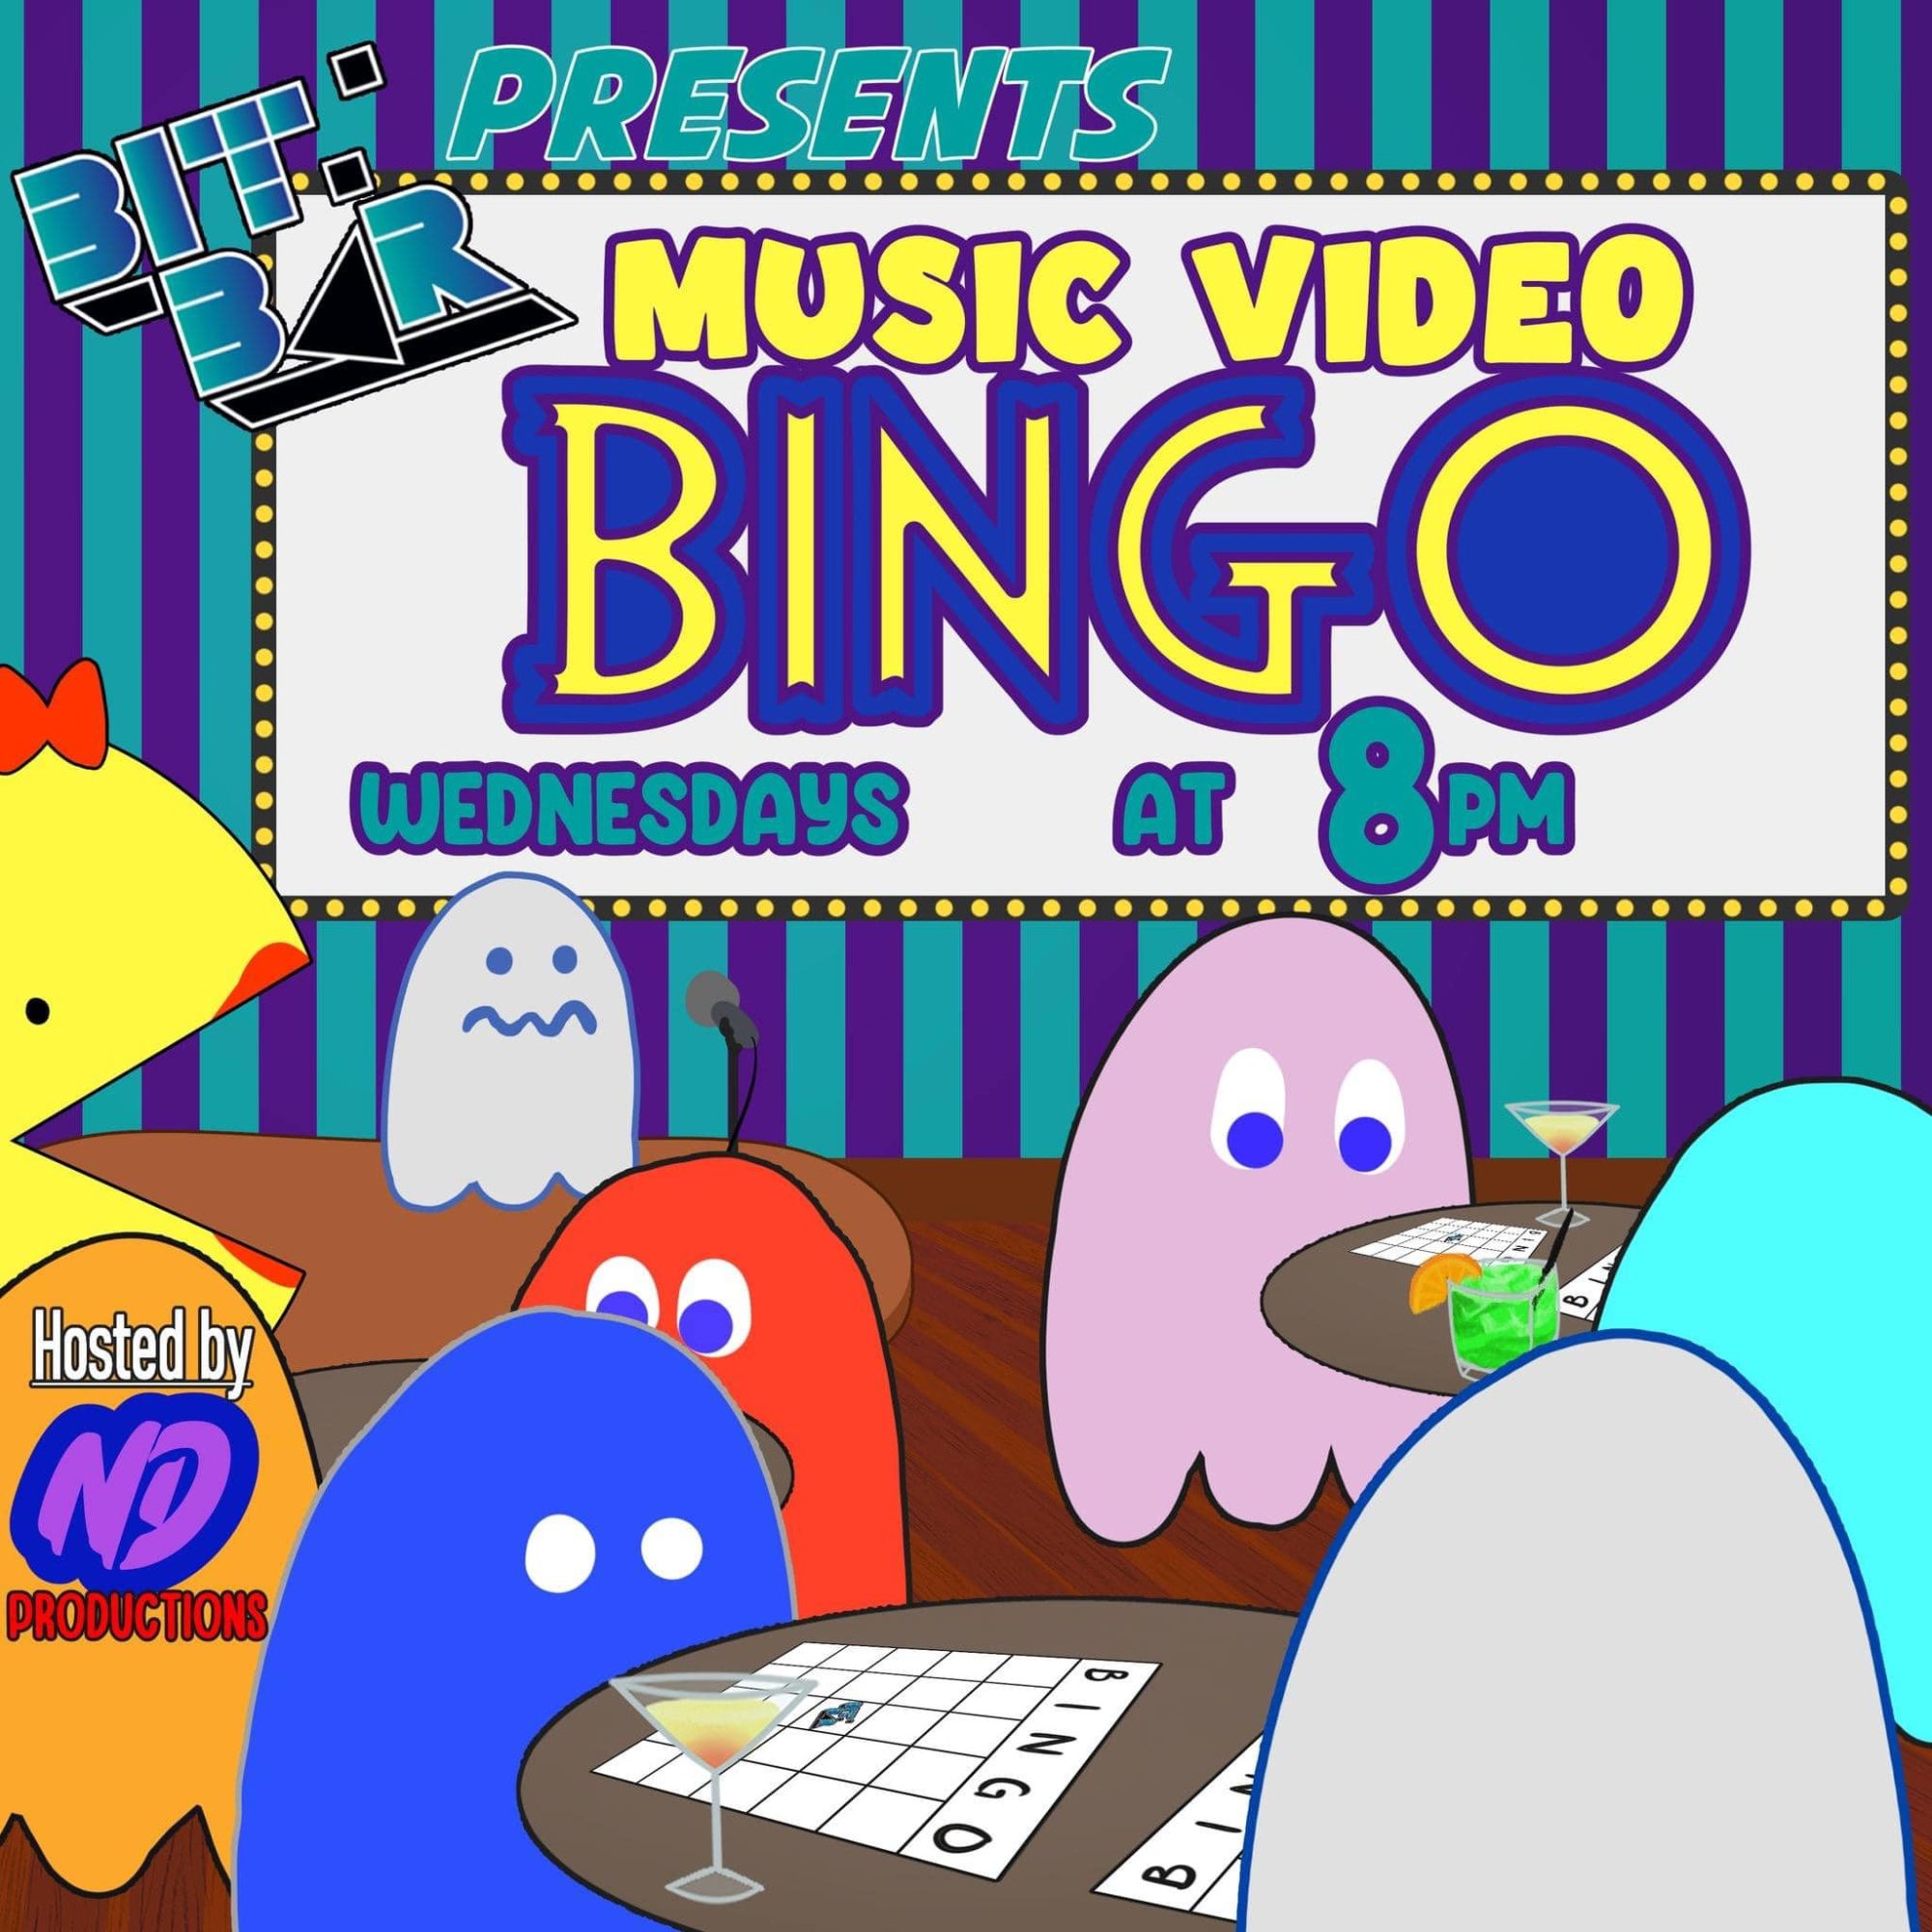 a poster for a video game called music video binggo.